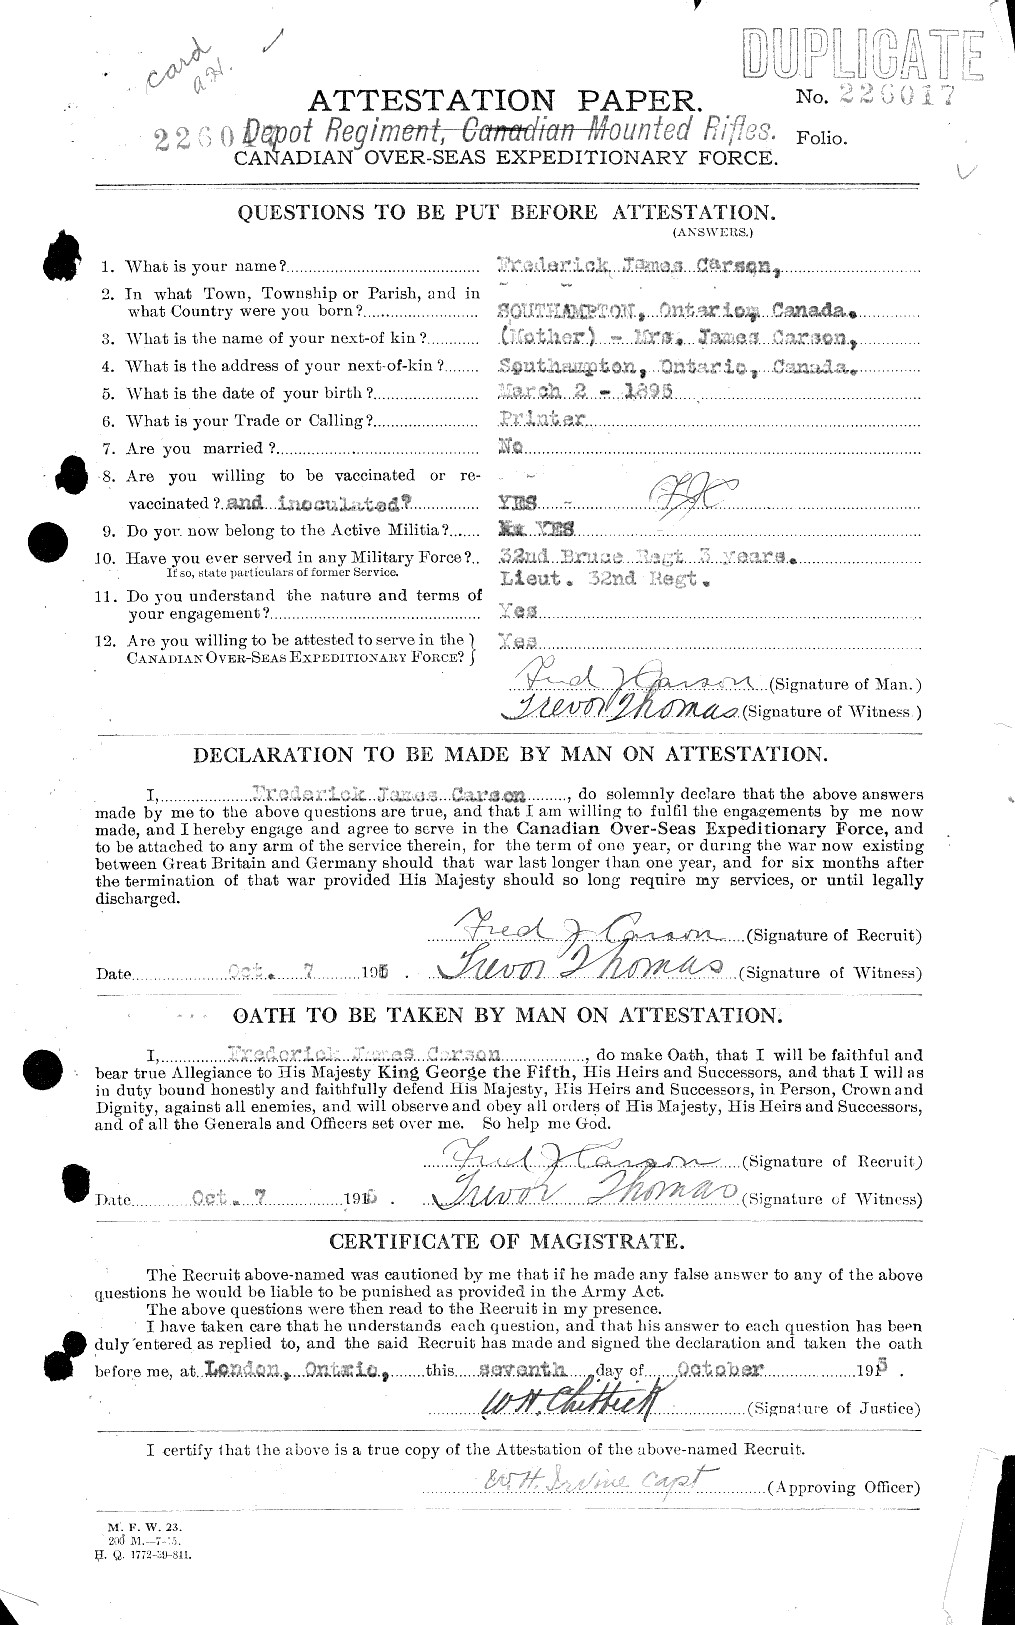 Personnel Records of the First World War - CEF 010737a